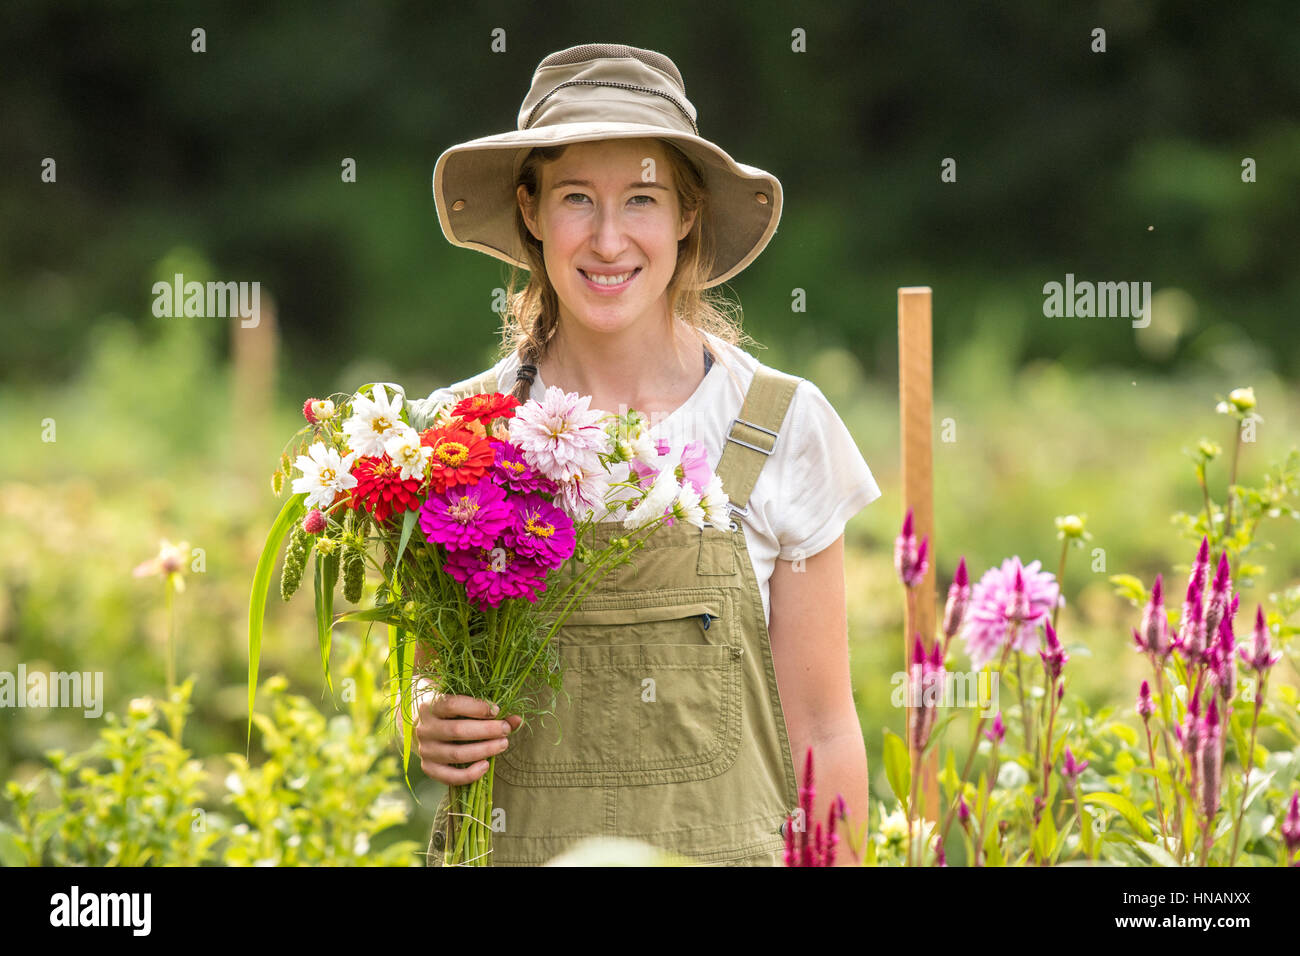 A woman poses with a bouquet of freshly cut flowers from a garden on a farm in rural Maryland. Stock Photo